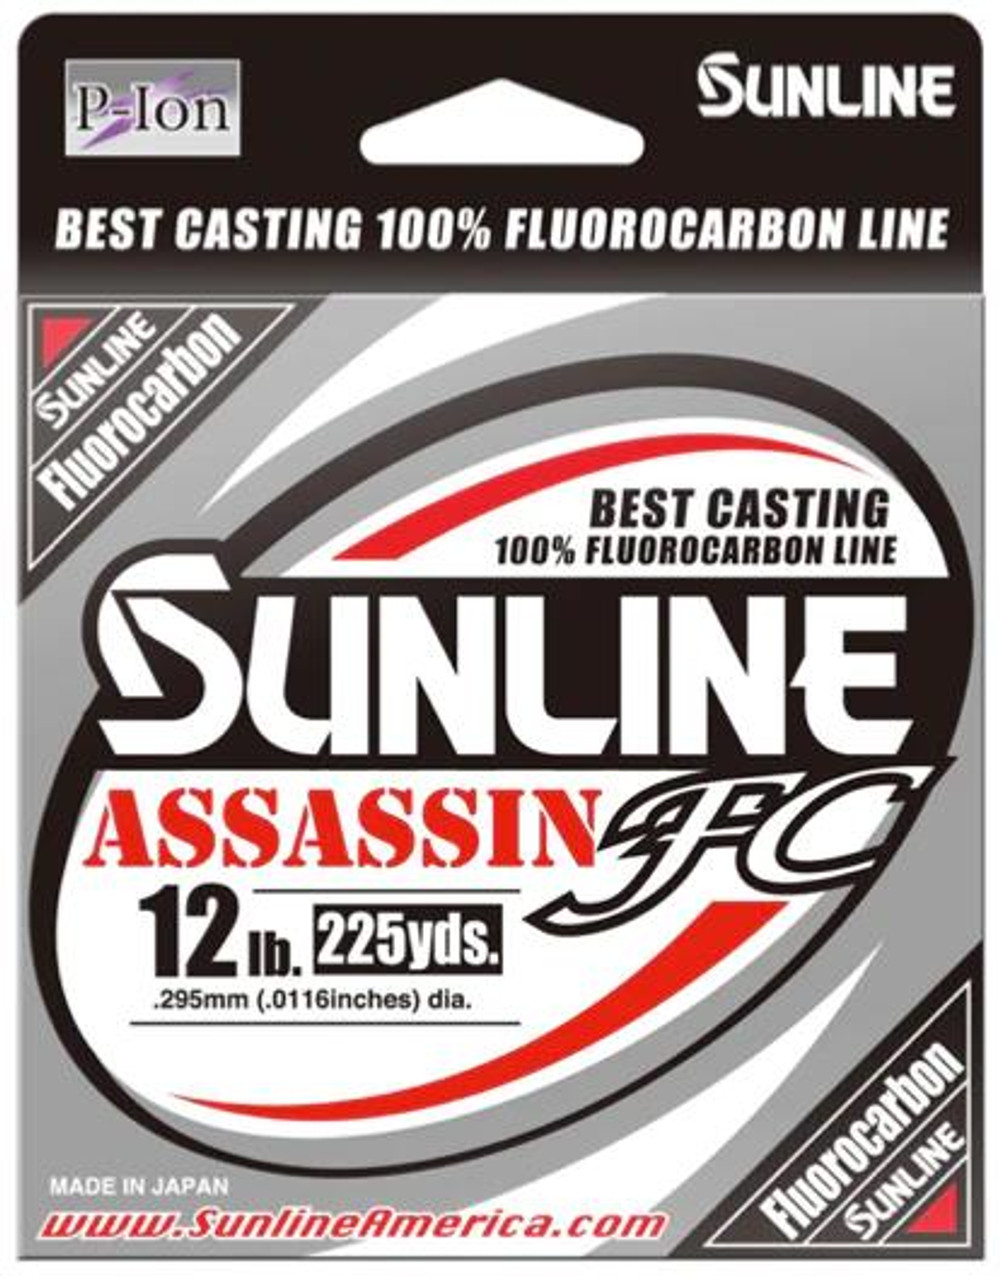 https://cdn11.bigcommerce.com/s-0xmhwue6/images/stencil/1280x1280/products/11449/43302/Sunline-Assassin-FC-Fluorocarbon-Natural-Clear-225-Yards-881879080184_image1__71373.1656432626.jpg?c=2